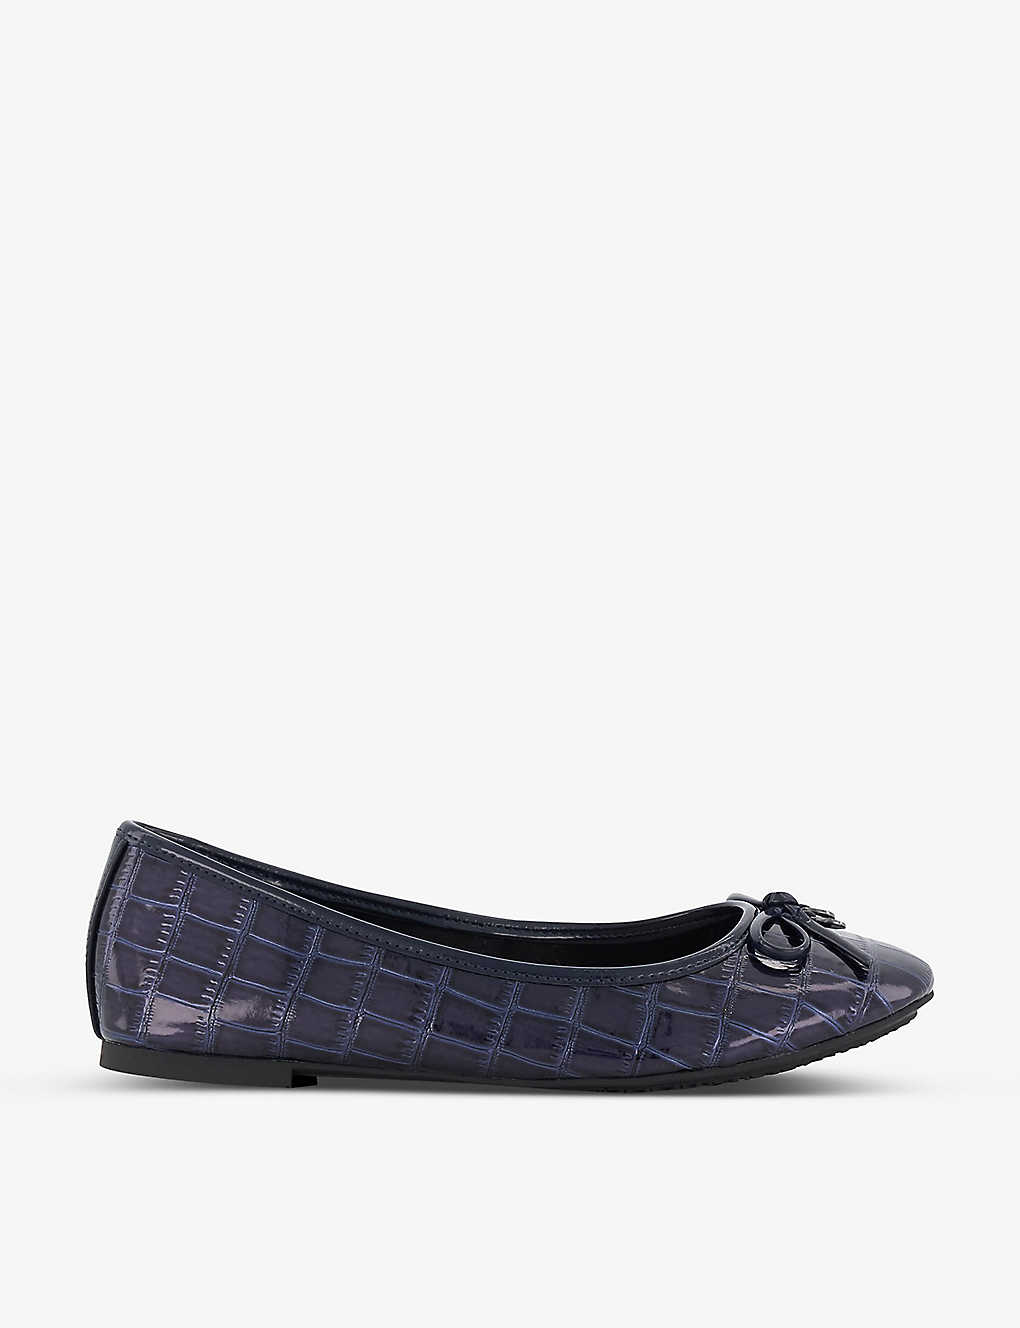 Dune Womens Navy-patent Synthetic Hallo Charm-embellished Mock-croc Leather Ballet Pumps